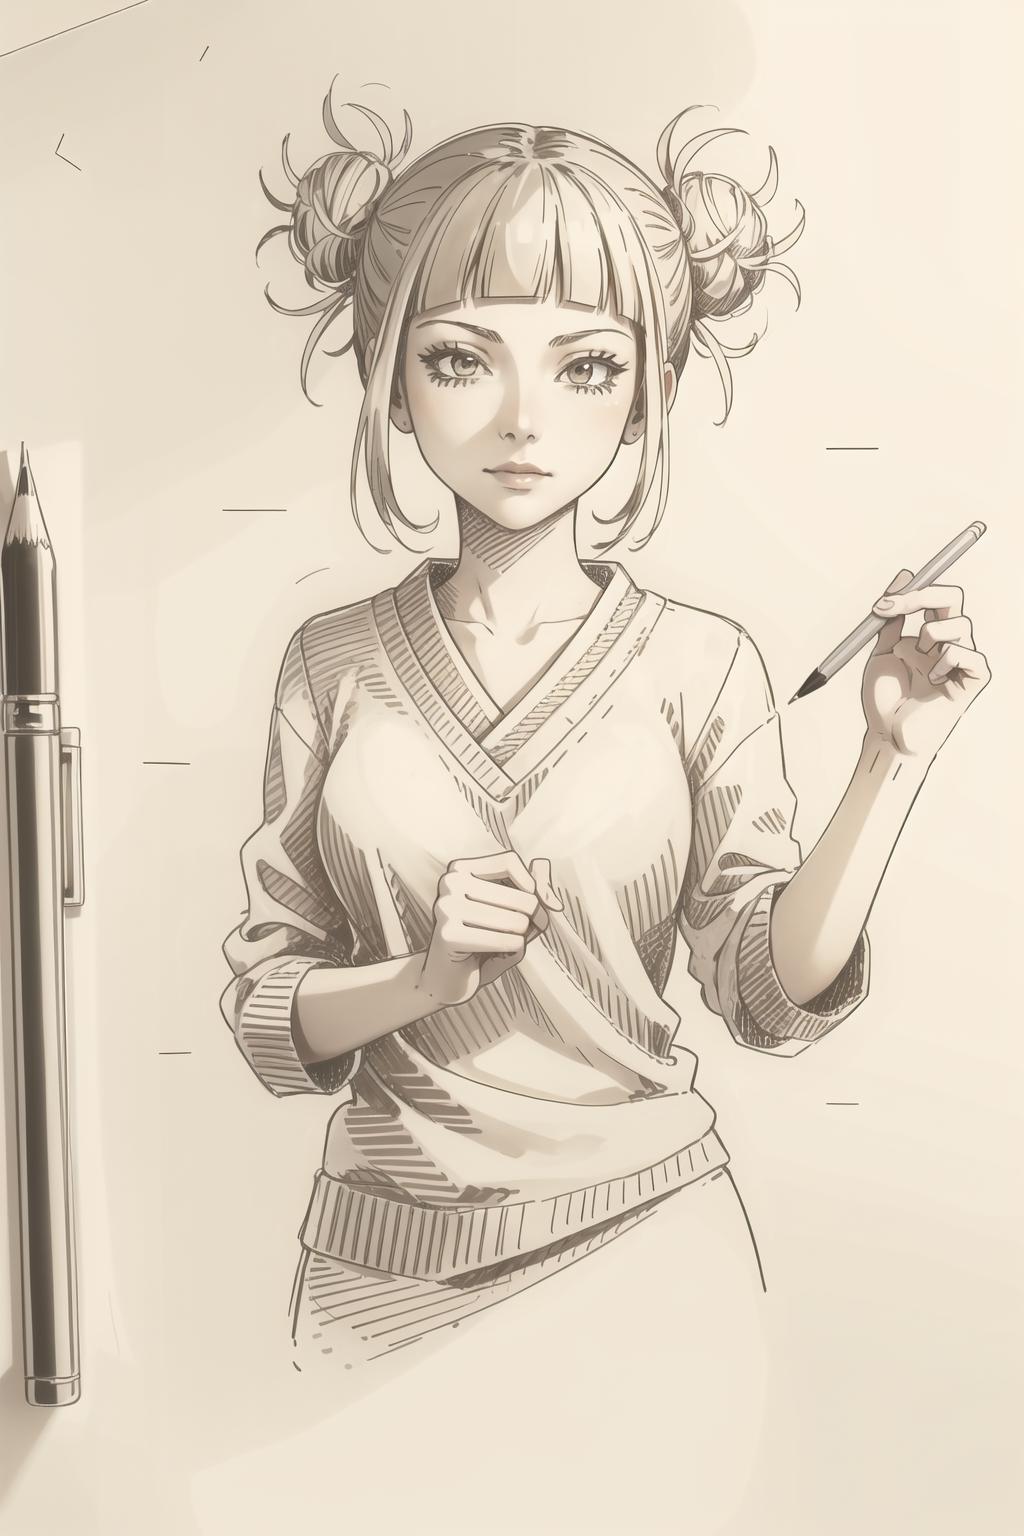 A woman in a white sweater holding a pen and pencil.